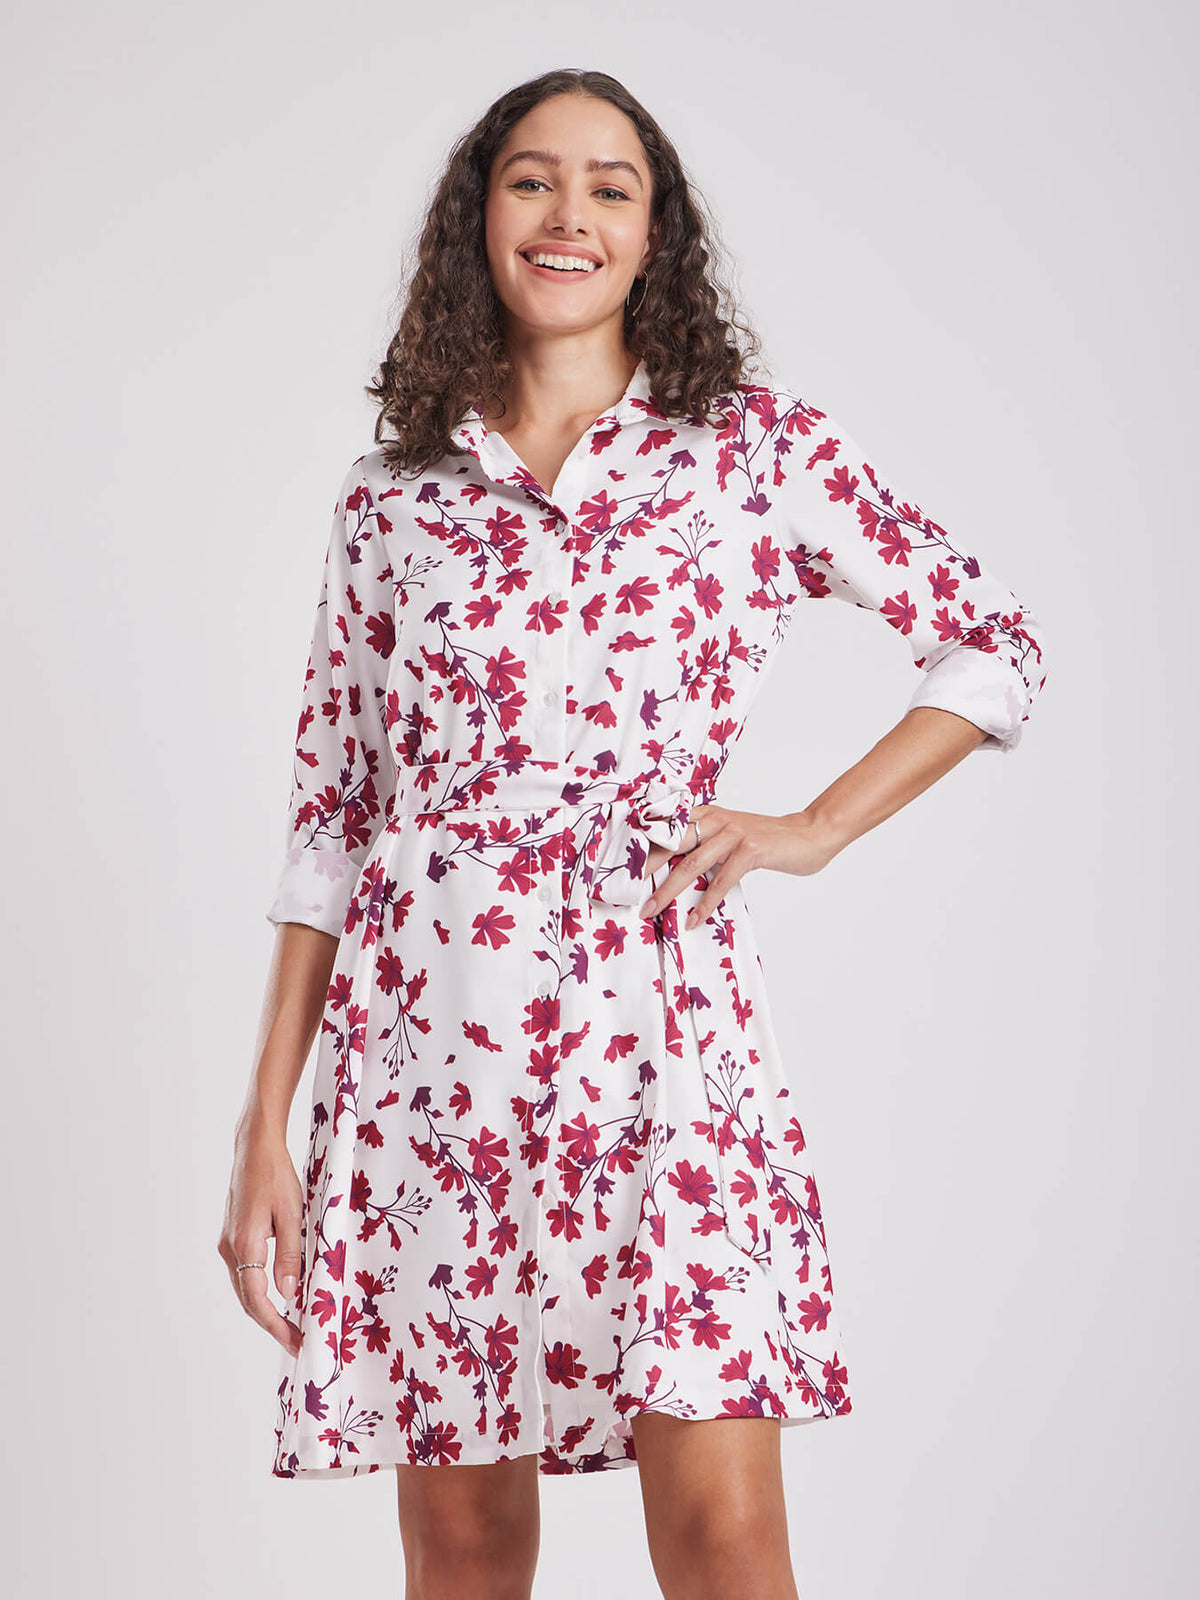 Floral Shirt Dress - Maroon And White